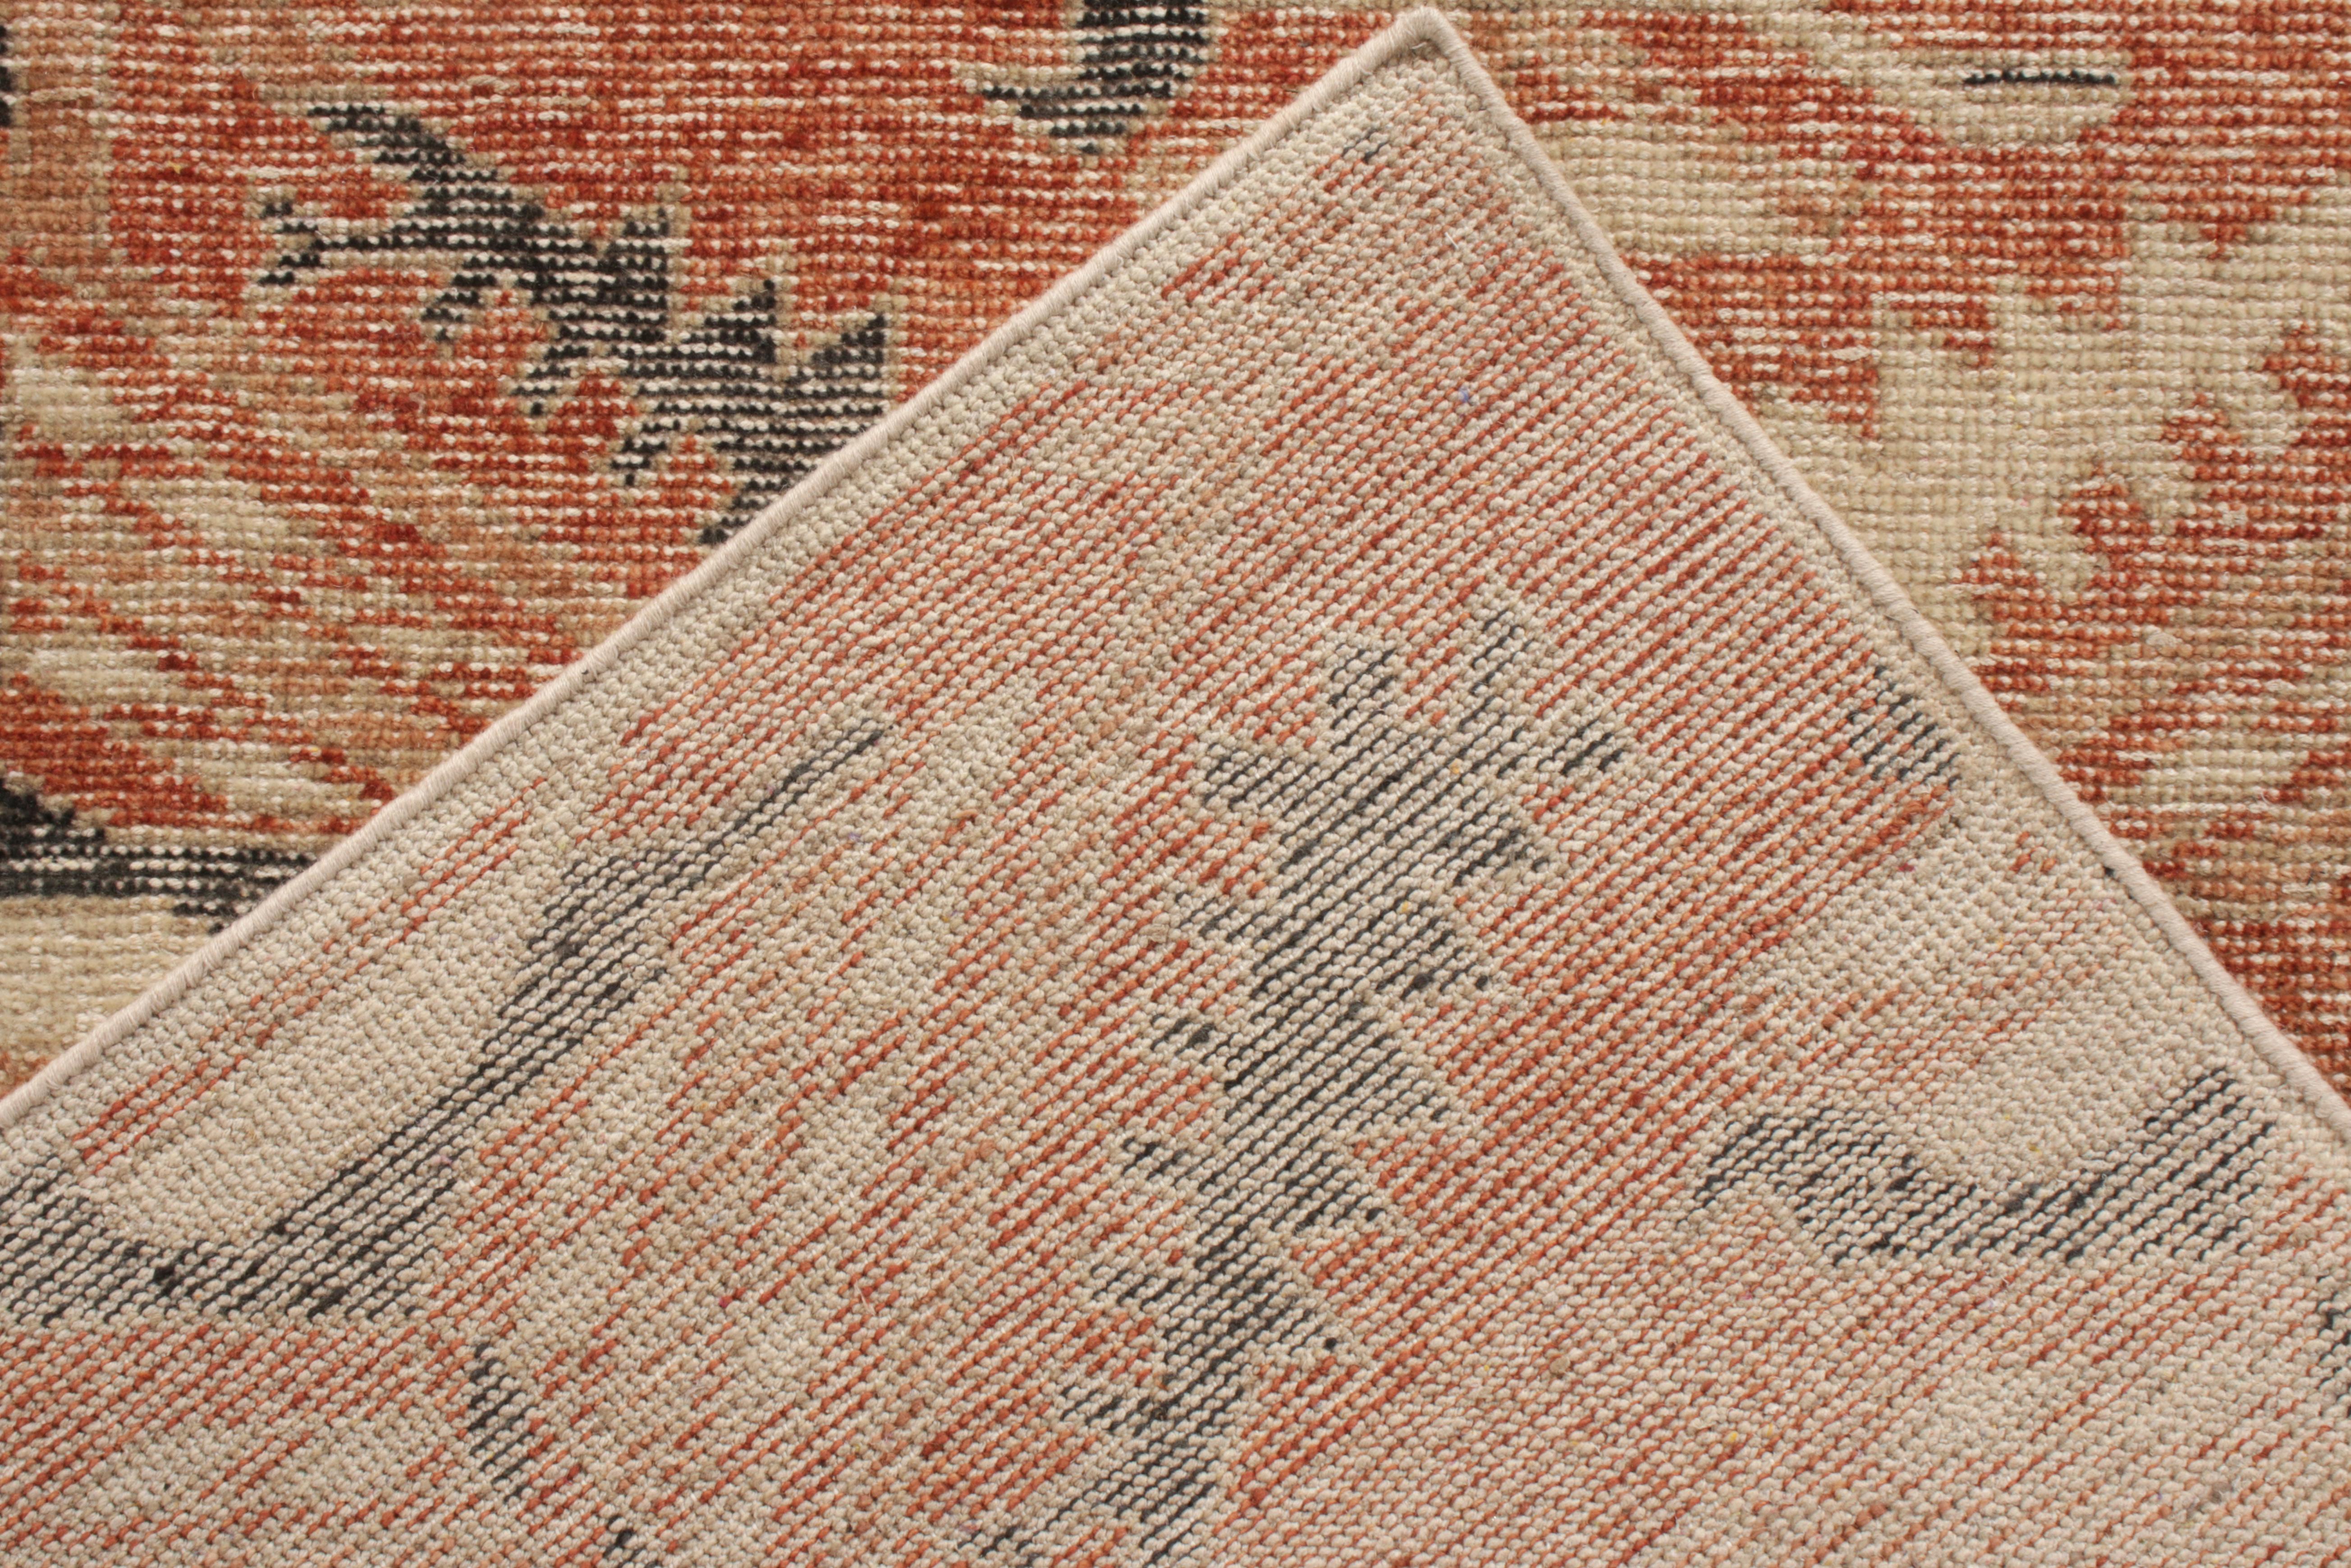 Hand-Knotted Rug & Kilim’s Distressed Style Runner in Orange-Red, Blue Geometric Pattern For Sale